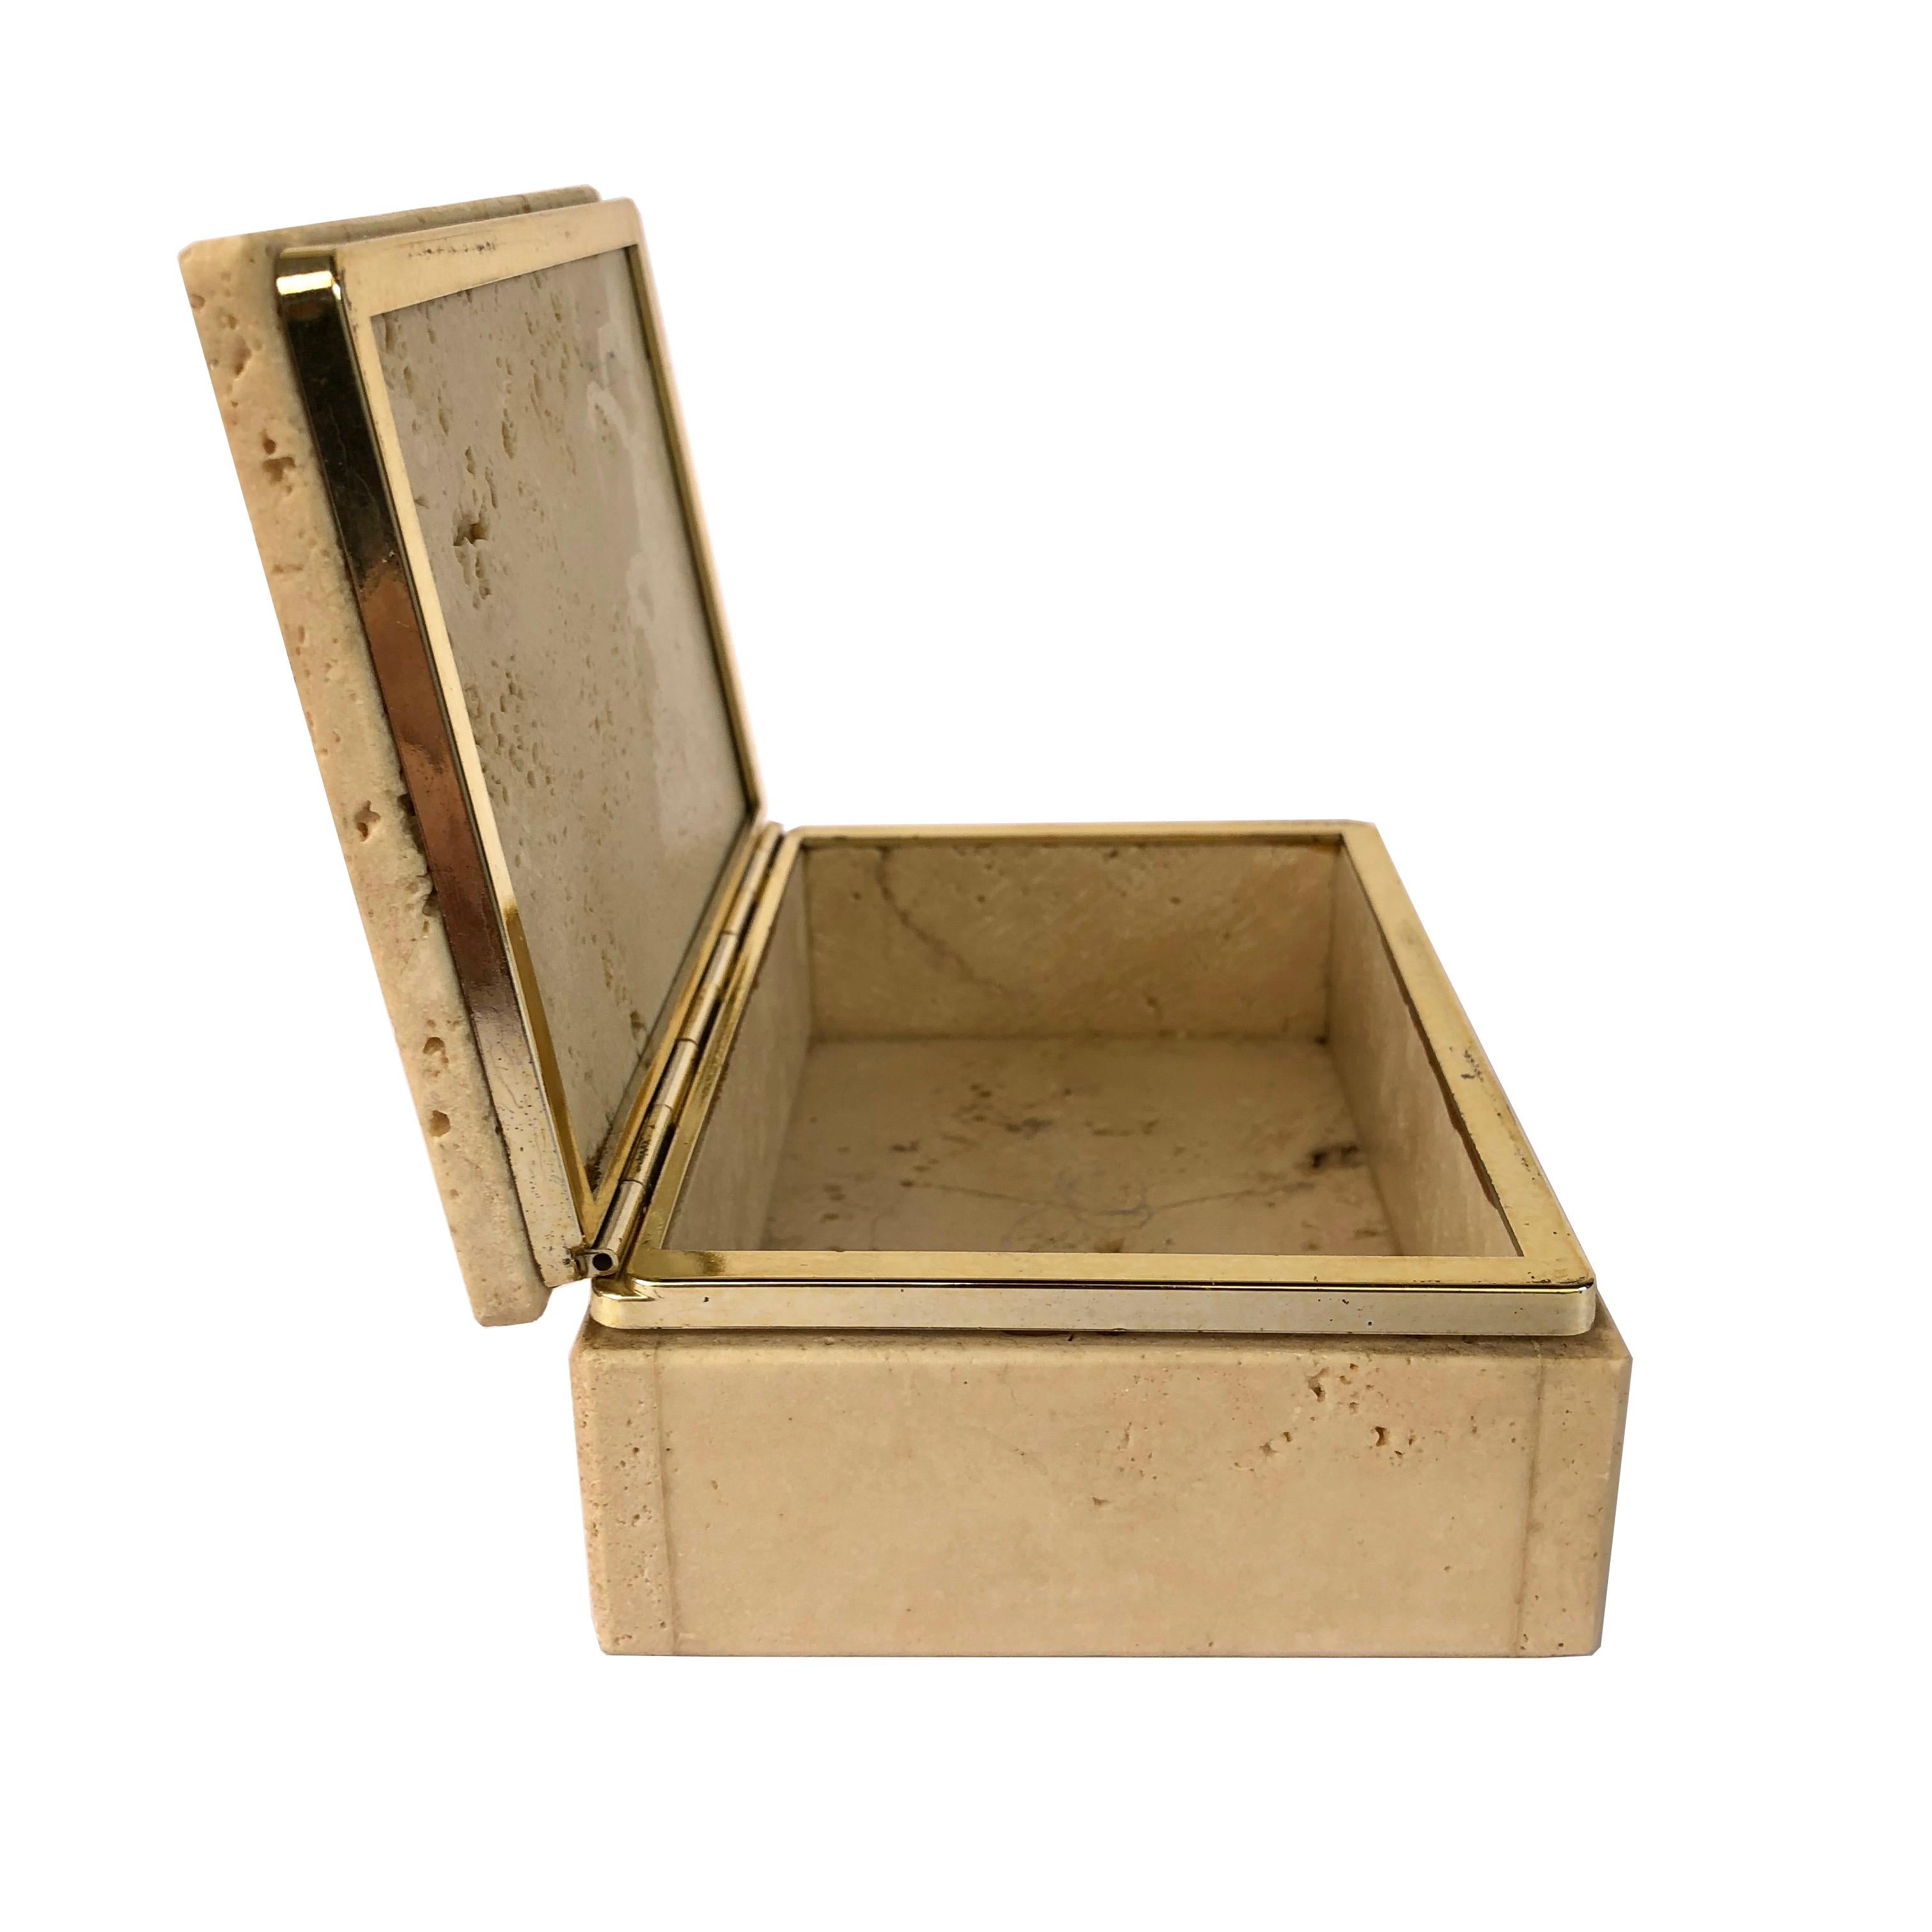 Italian Travertine and Brass Hinged Box in Organic Style Attributed to Fratelli Mannelli